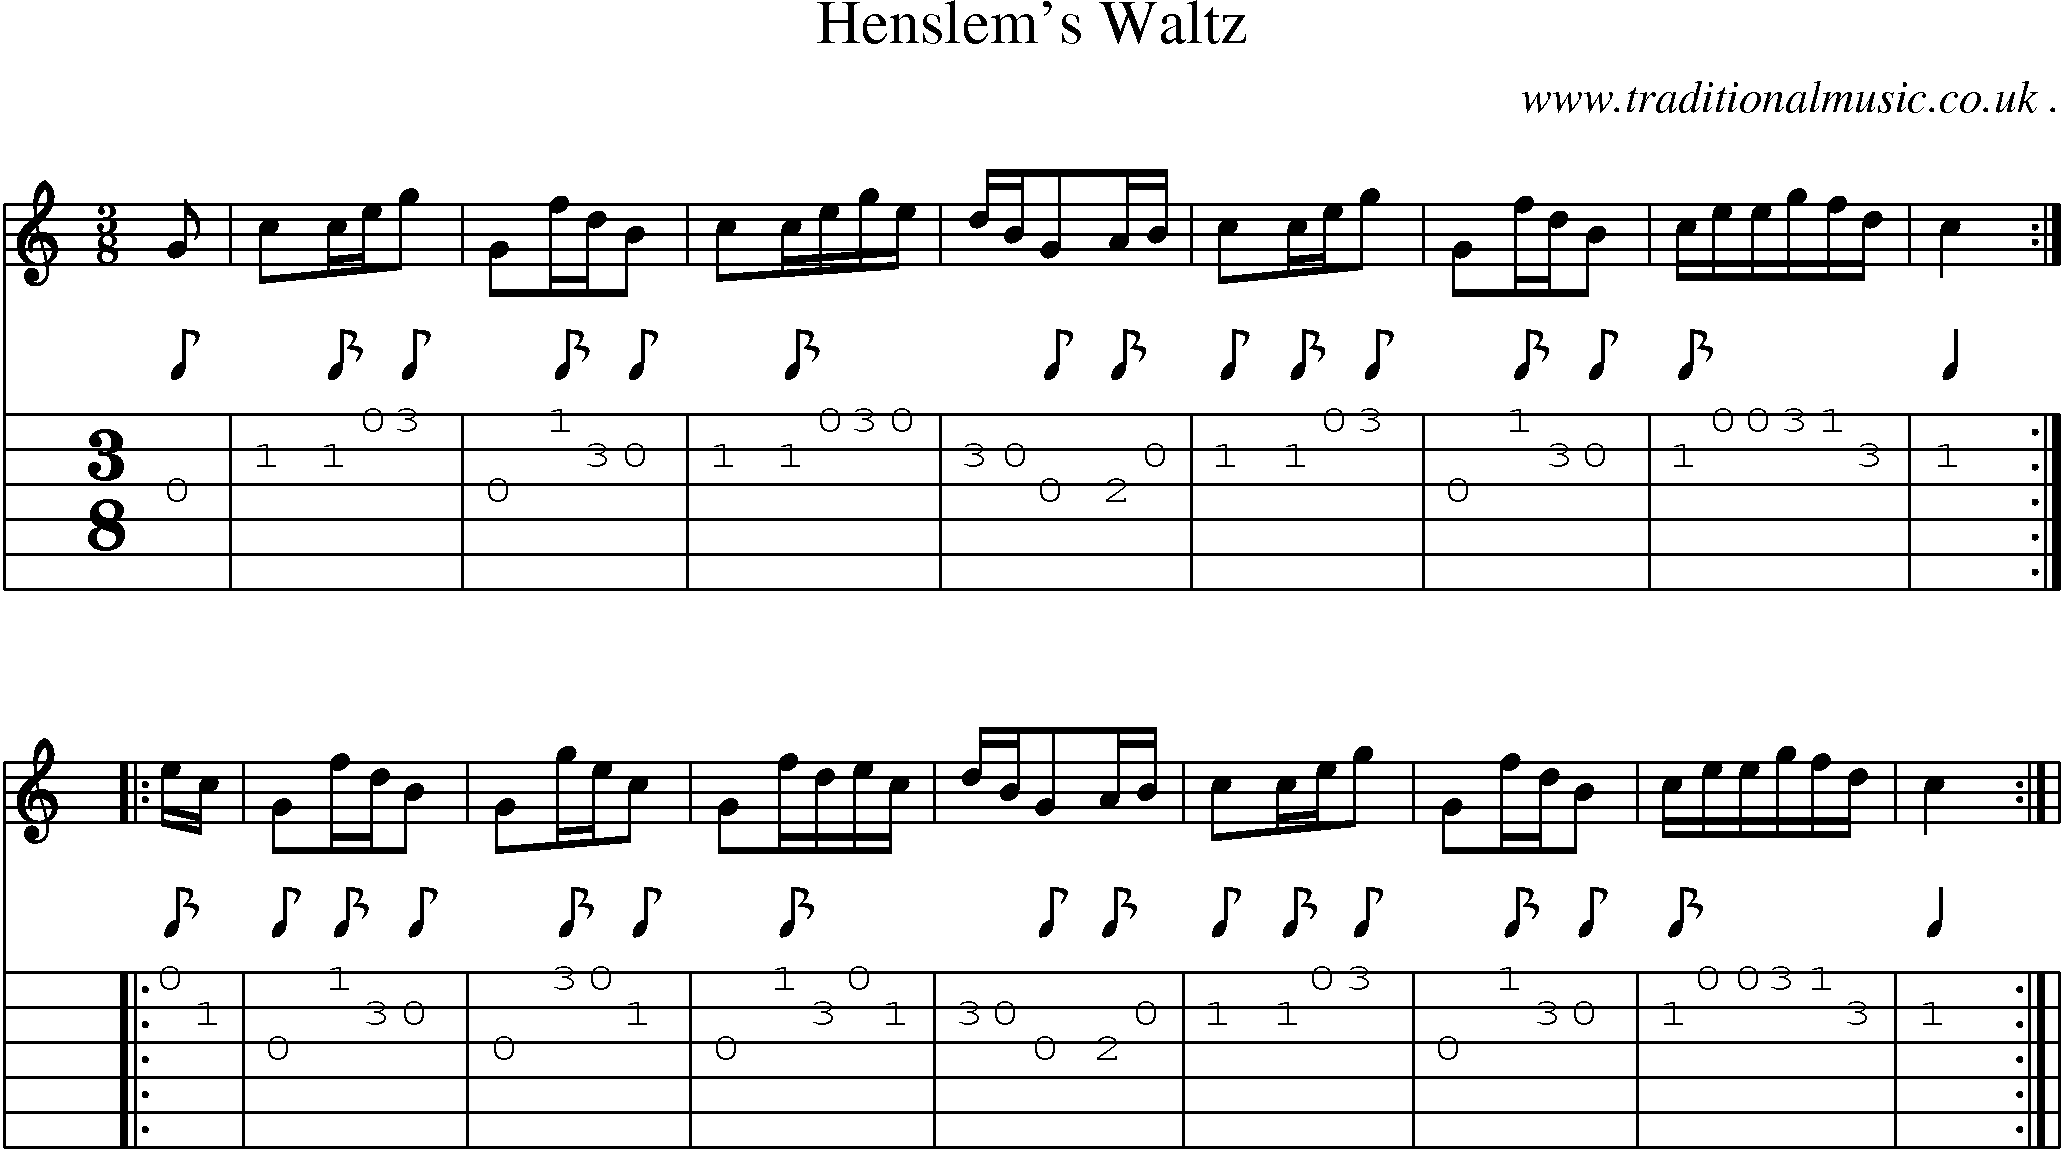 Sheet-Music and Guitar Tabs for Henslems Waltz